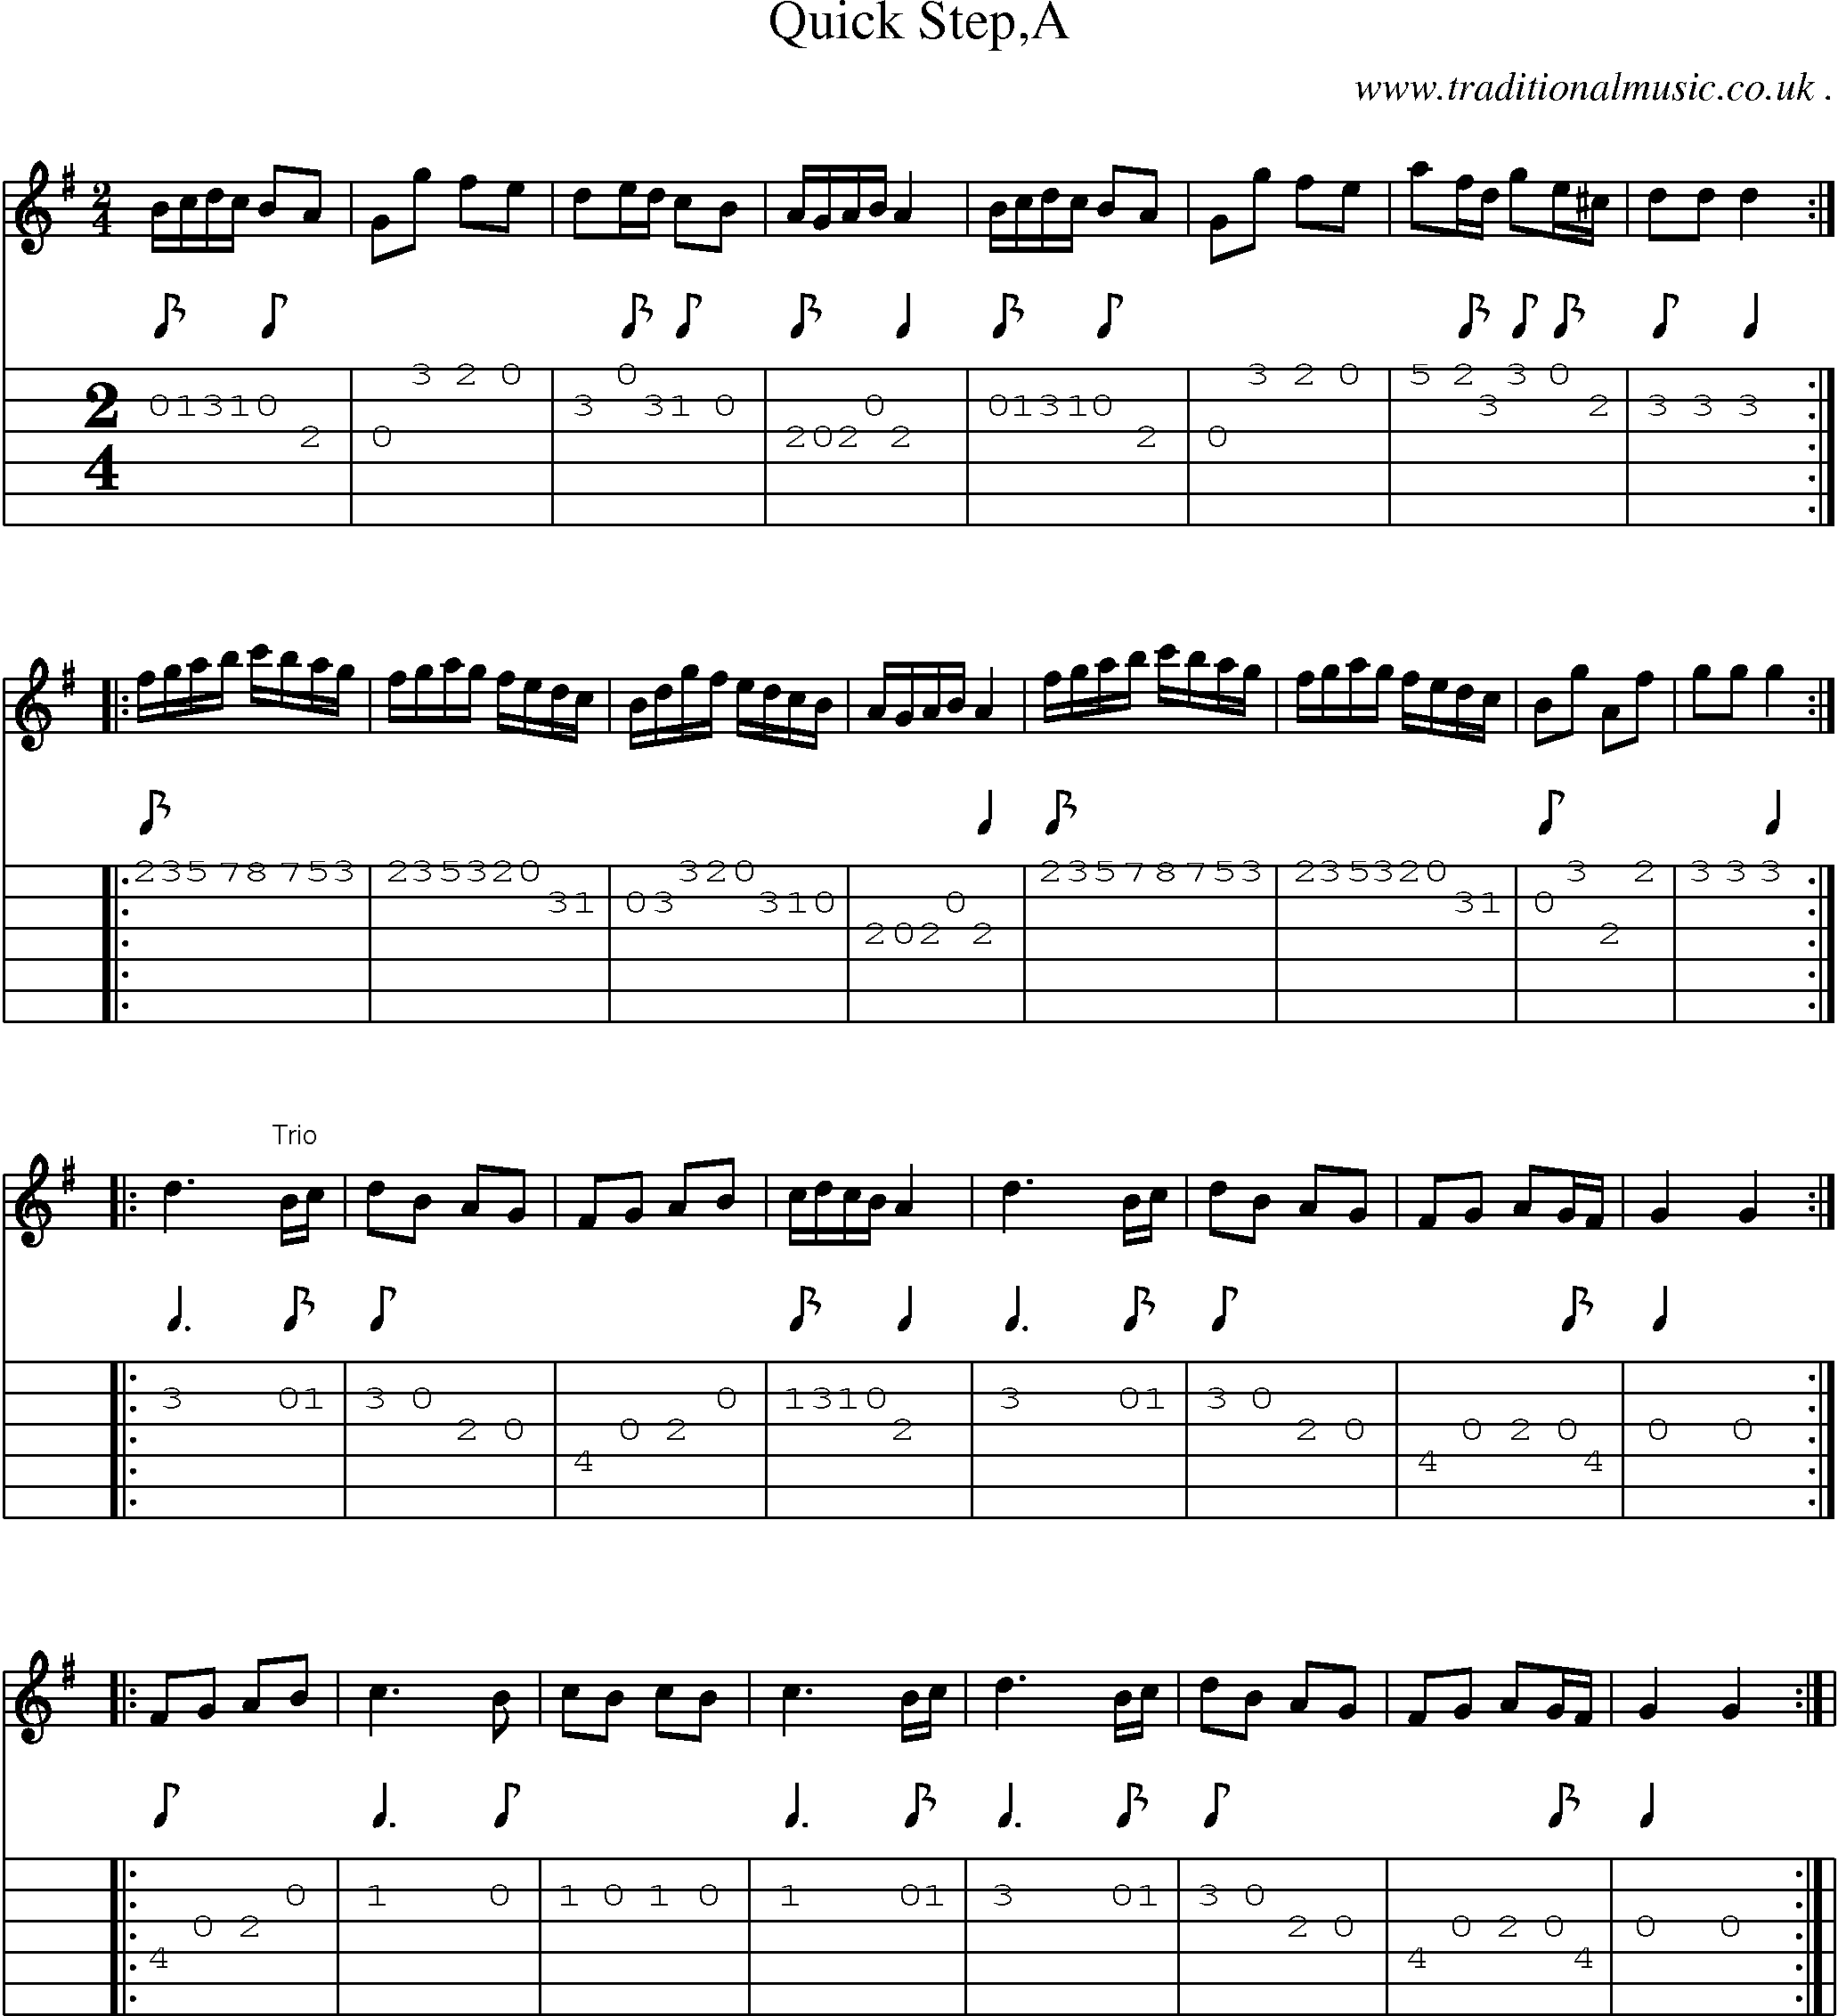 Sheet-Music and Guitar Tabs for Quick Stepa